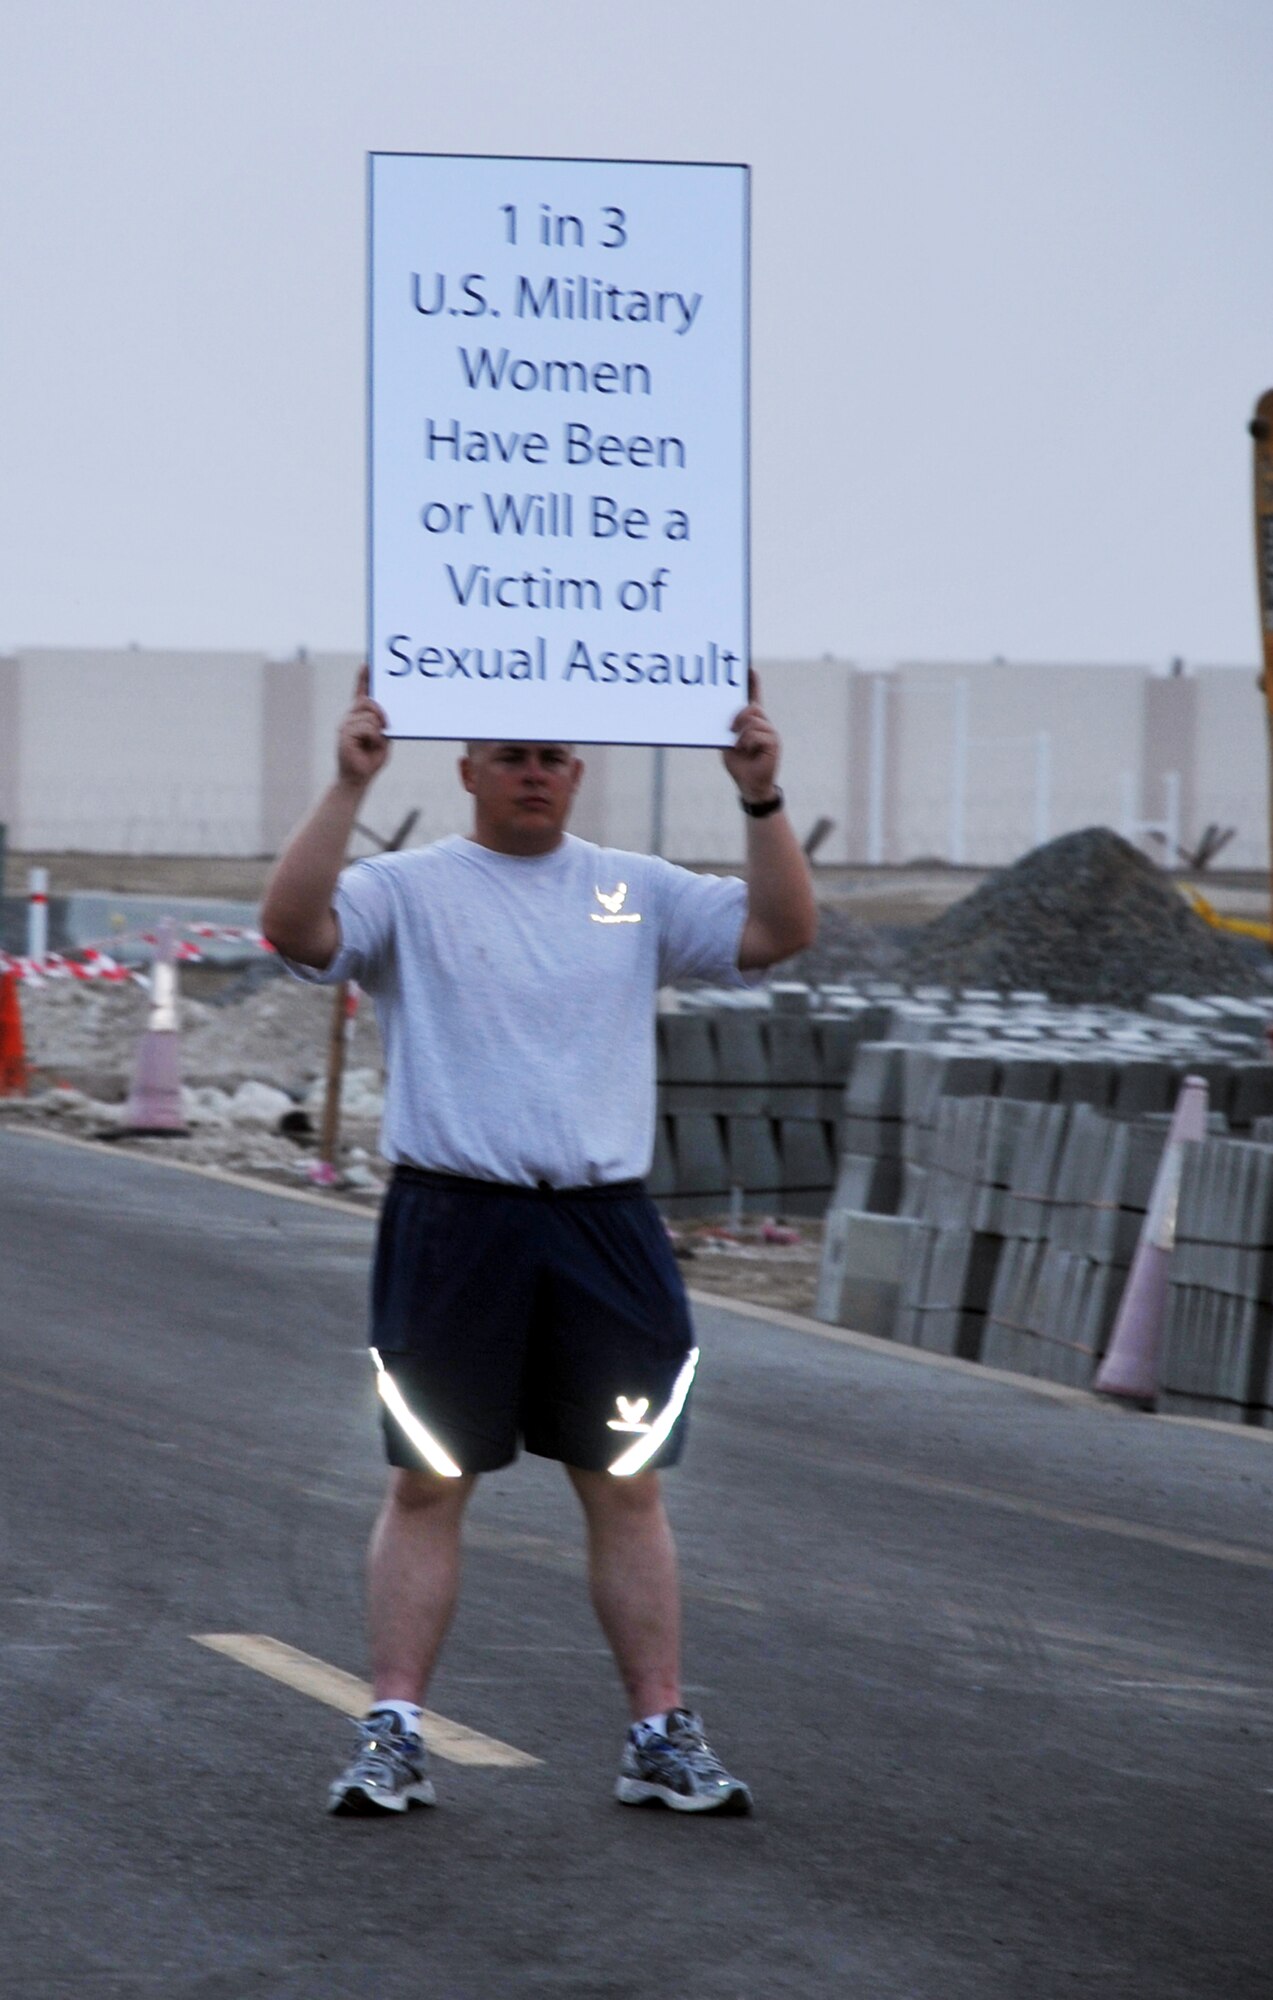 Master Sgt. Greg Ellis, from the 380th Expeditionary Logistics Readiness Squadron fuels management flight, holds up a statistics sign on sexual assault, as part of the "Walk A Mile In Their Shoes" event by the 380th Air Expeditionary Wing at a non-disclosed base in Southwest Asia on April, 19, 2010, in observance of Sexual Assault Awareness Month. Throughout a one-mile walk, signs such of this were placed while walk participants read them and walked in silence. The event was organized by Capt. Richard Laca -- the 380th AEW sexual assault response coordinator. (U.S. Air Force Photo/Master Sgt. Scott T. Sturkol/Released)